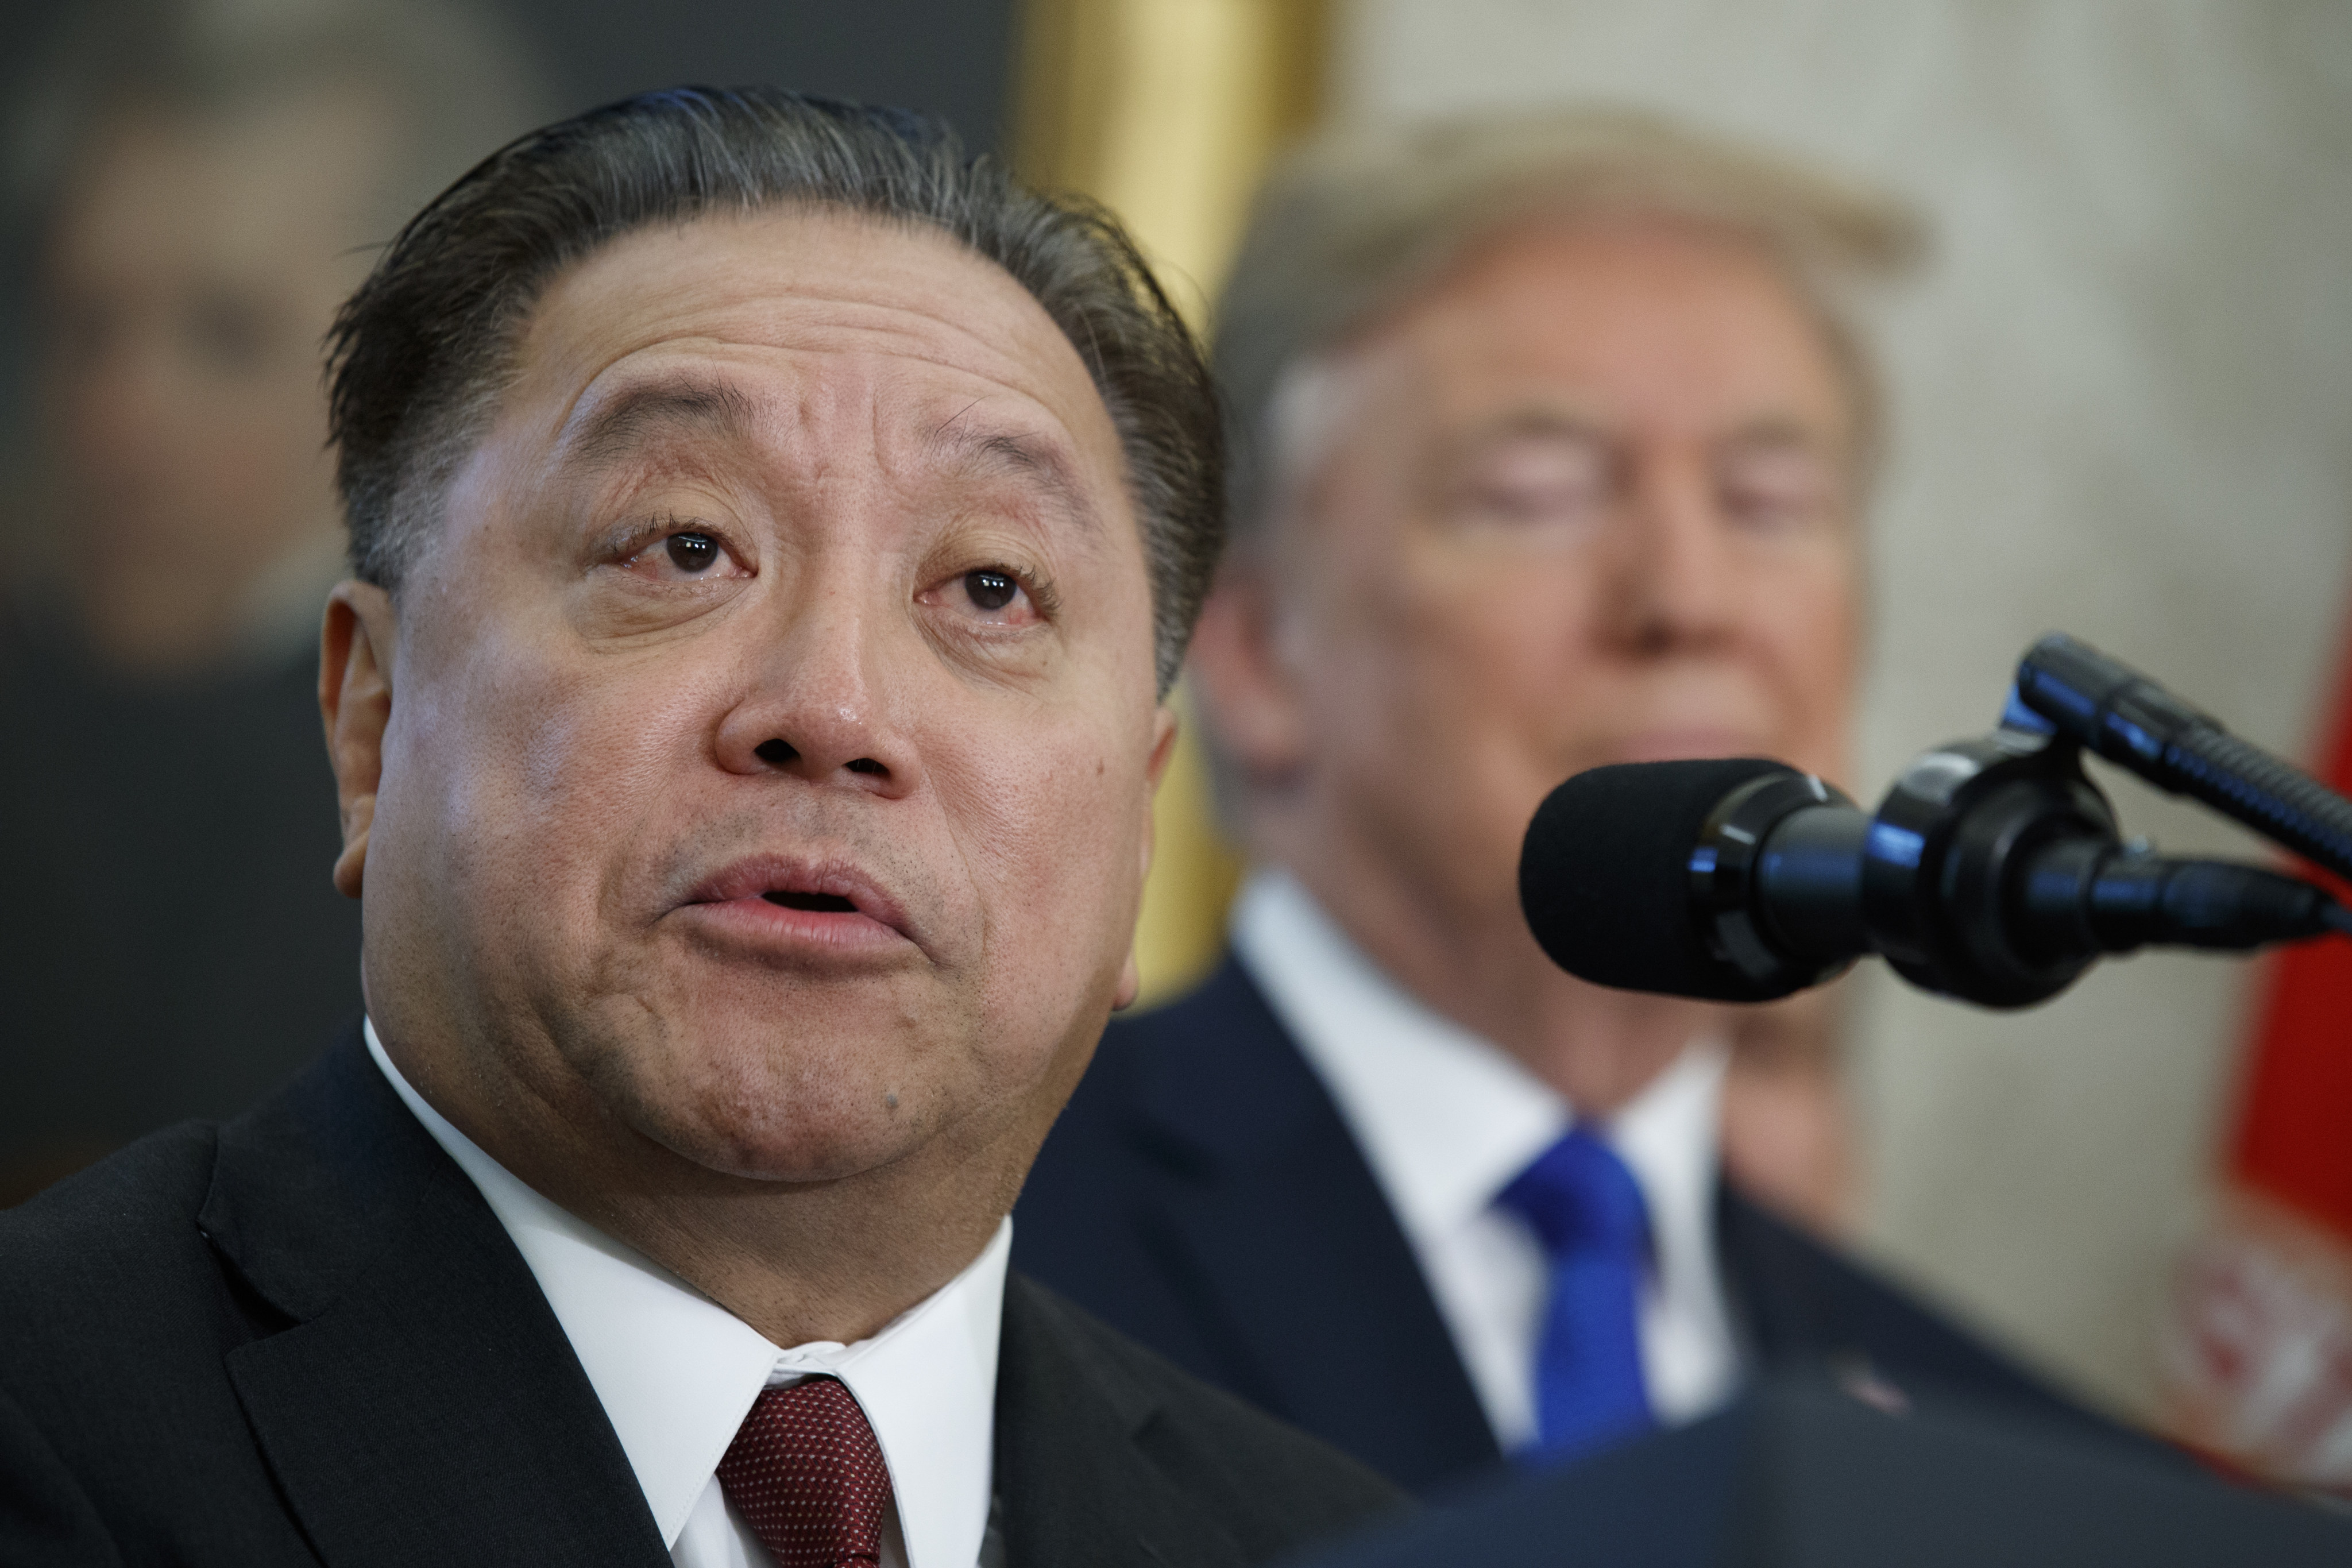 Broadcom CEO Hock Tan speaks during an event to announce the company is moving its global headquarters to the United States, in the Oval Office of the White House in November 2017. Photo: AP